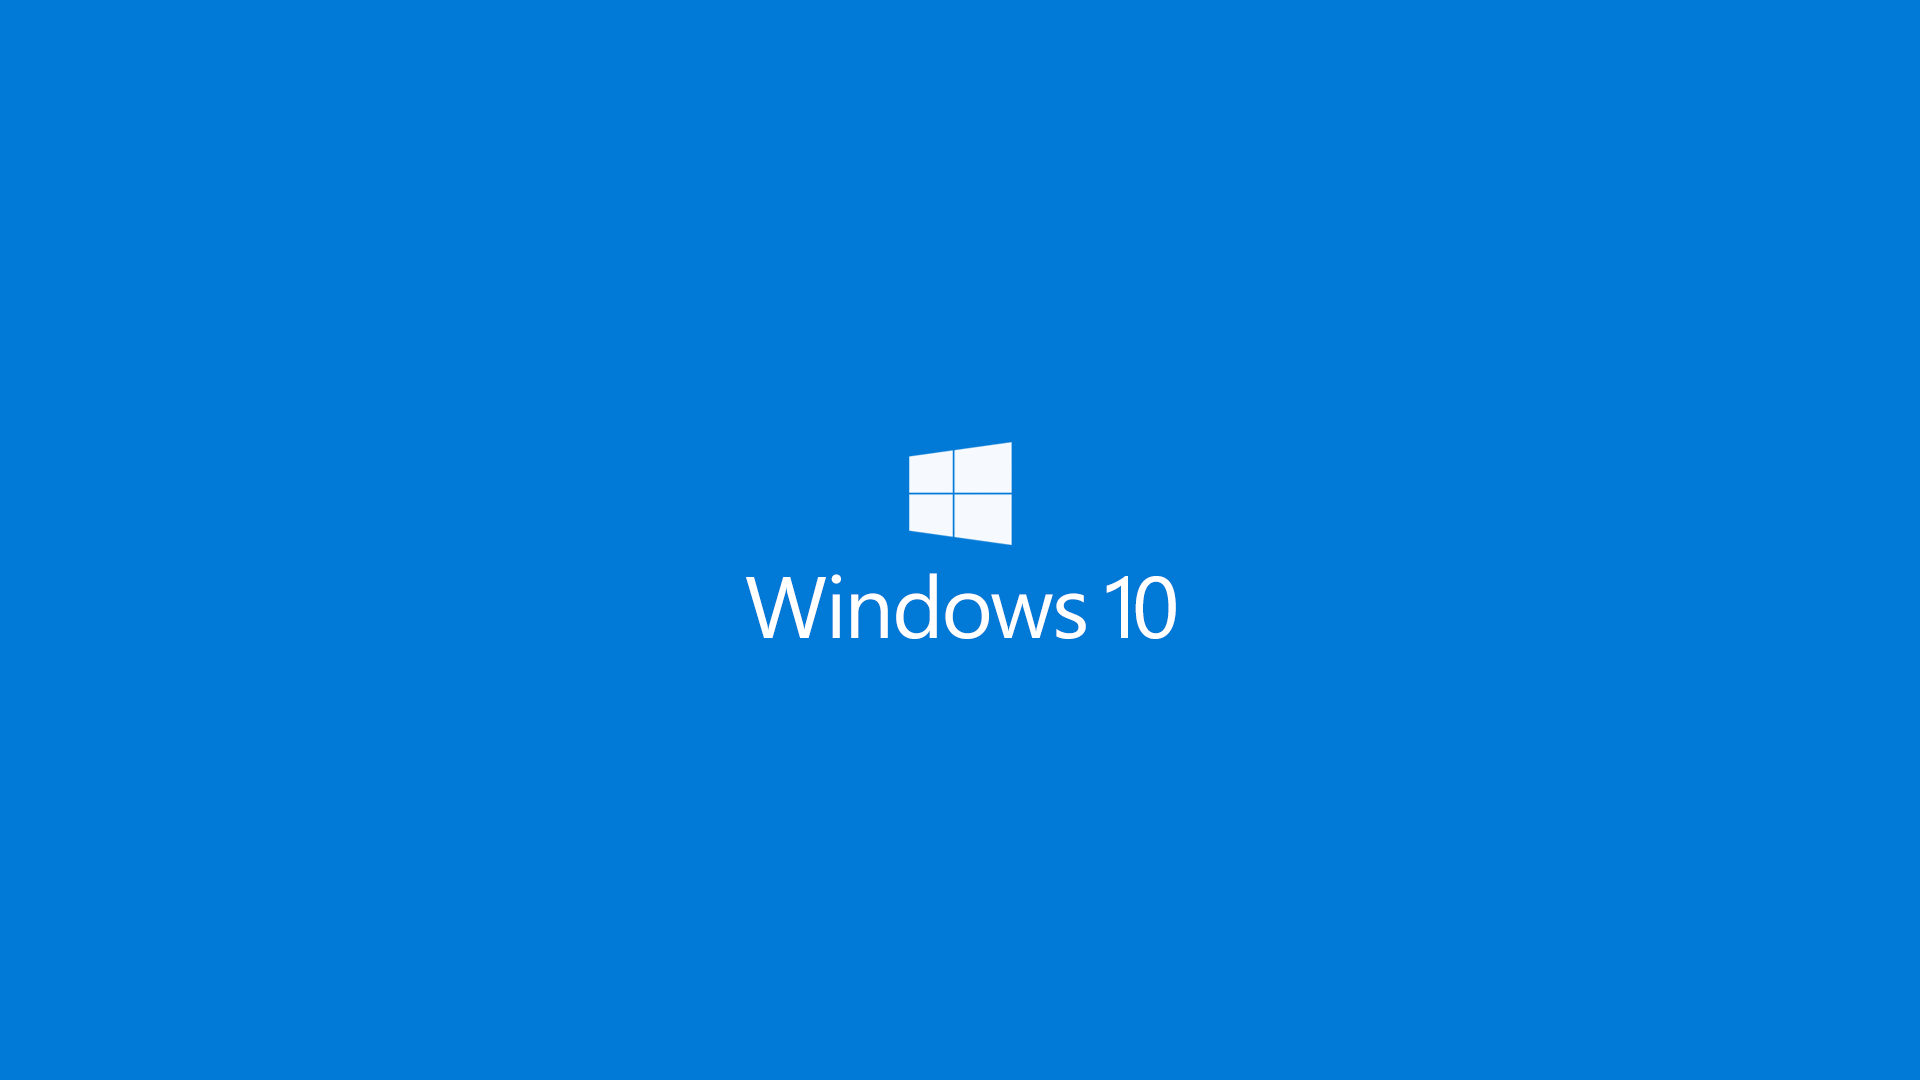 10 Wallpaper Backgrounds Windows 10 High Quality Wallpapers Windows 10